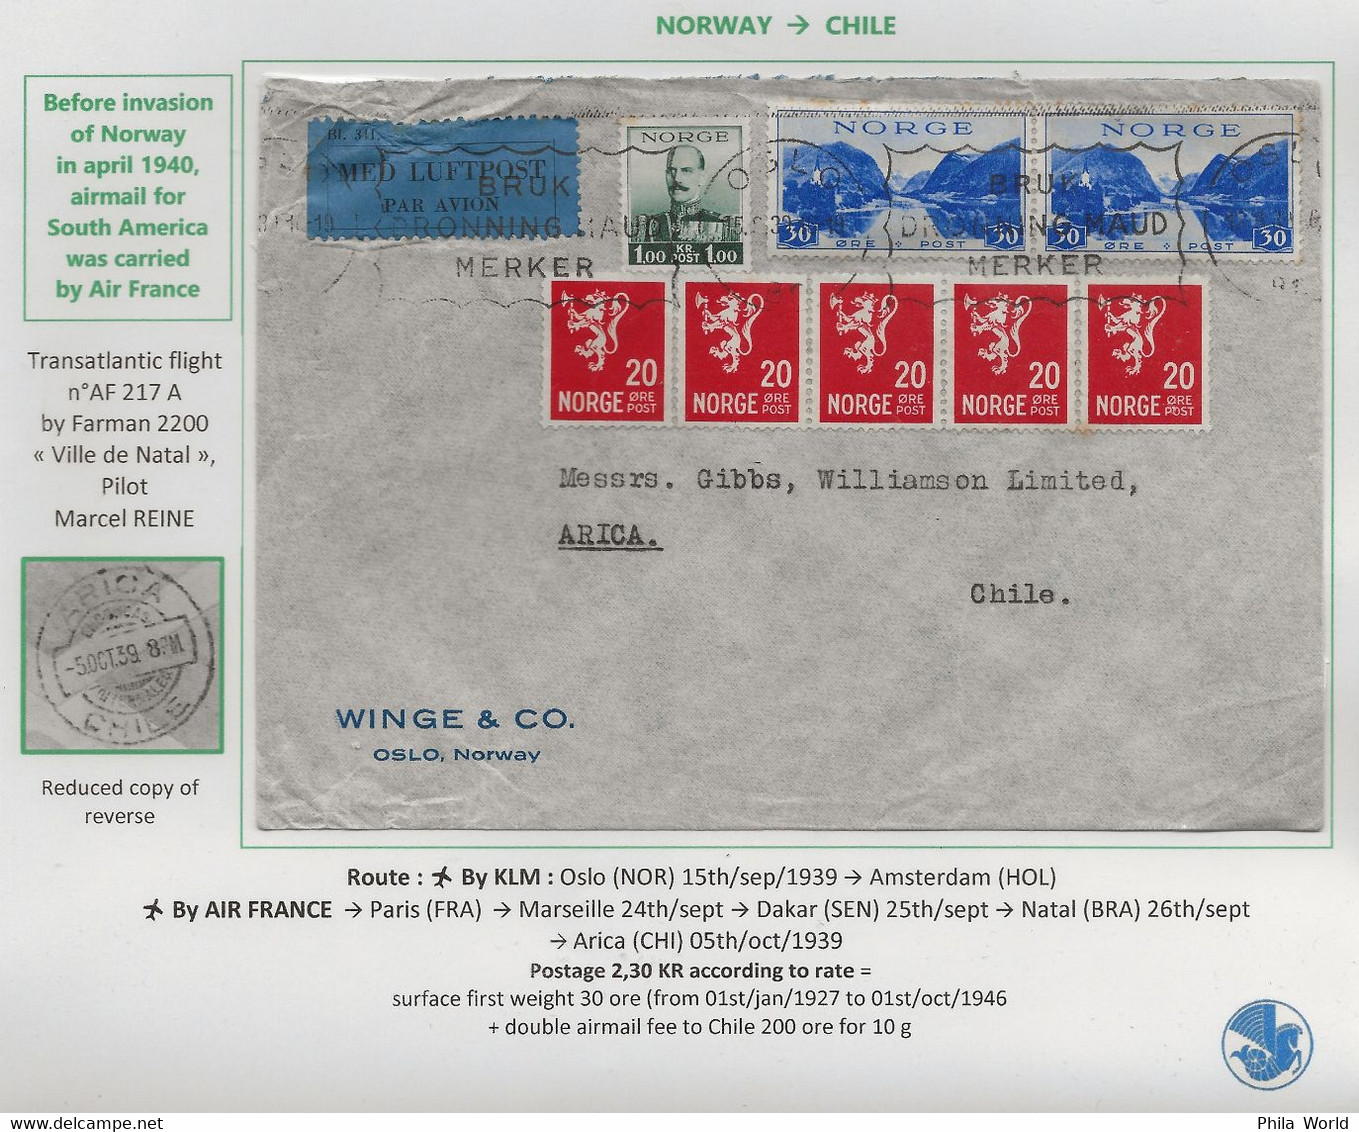 AIR FRANCE 1939 NORWAY Oslo CHILE Arica Air Mail Cover Via KLM Amsterdam AF 217 A Marcel REINE - Covers & Documents